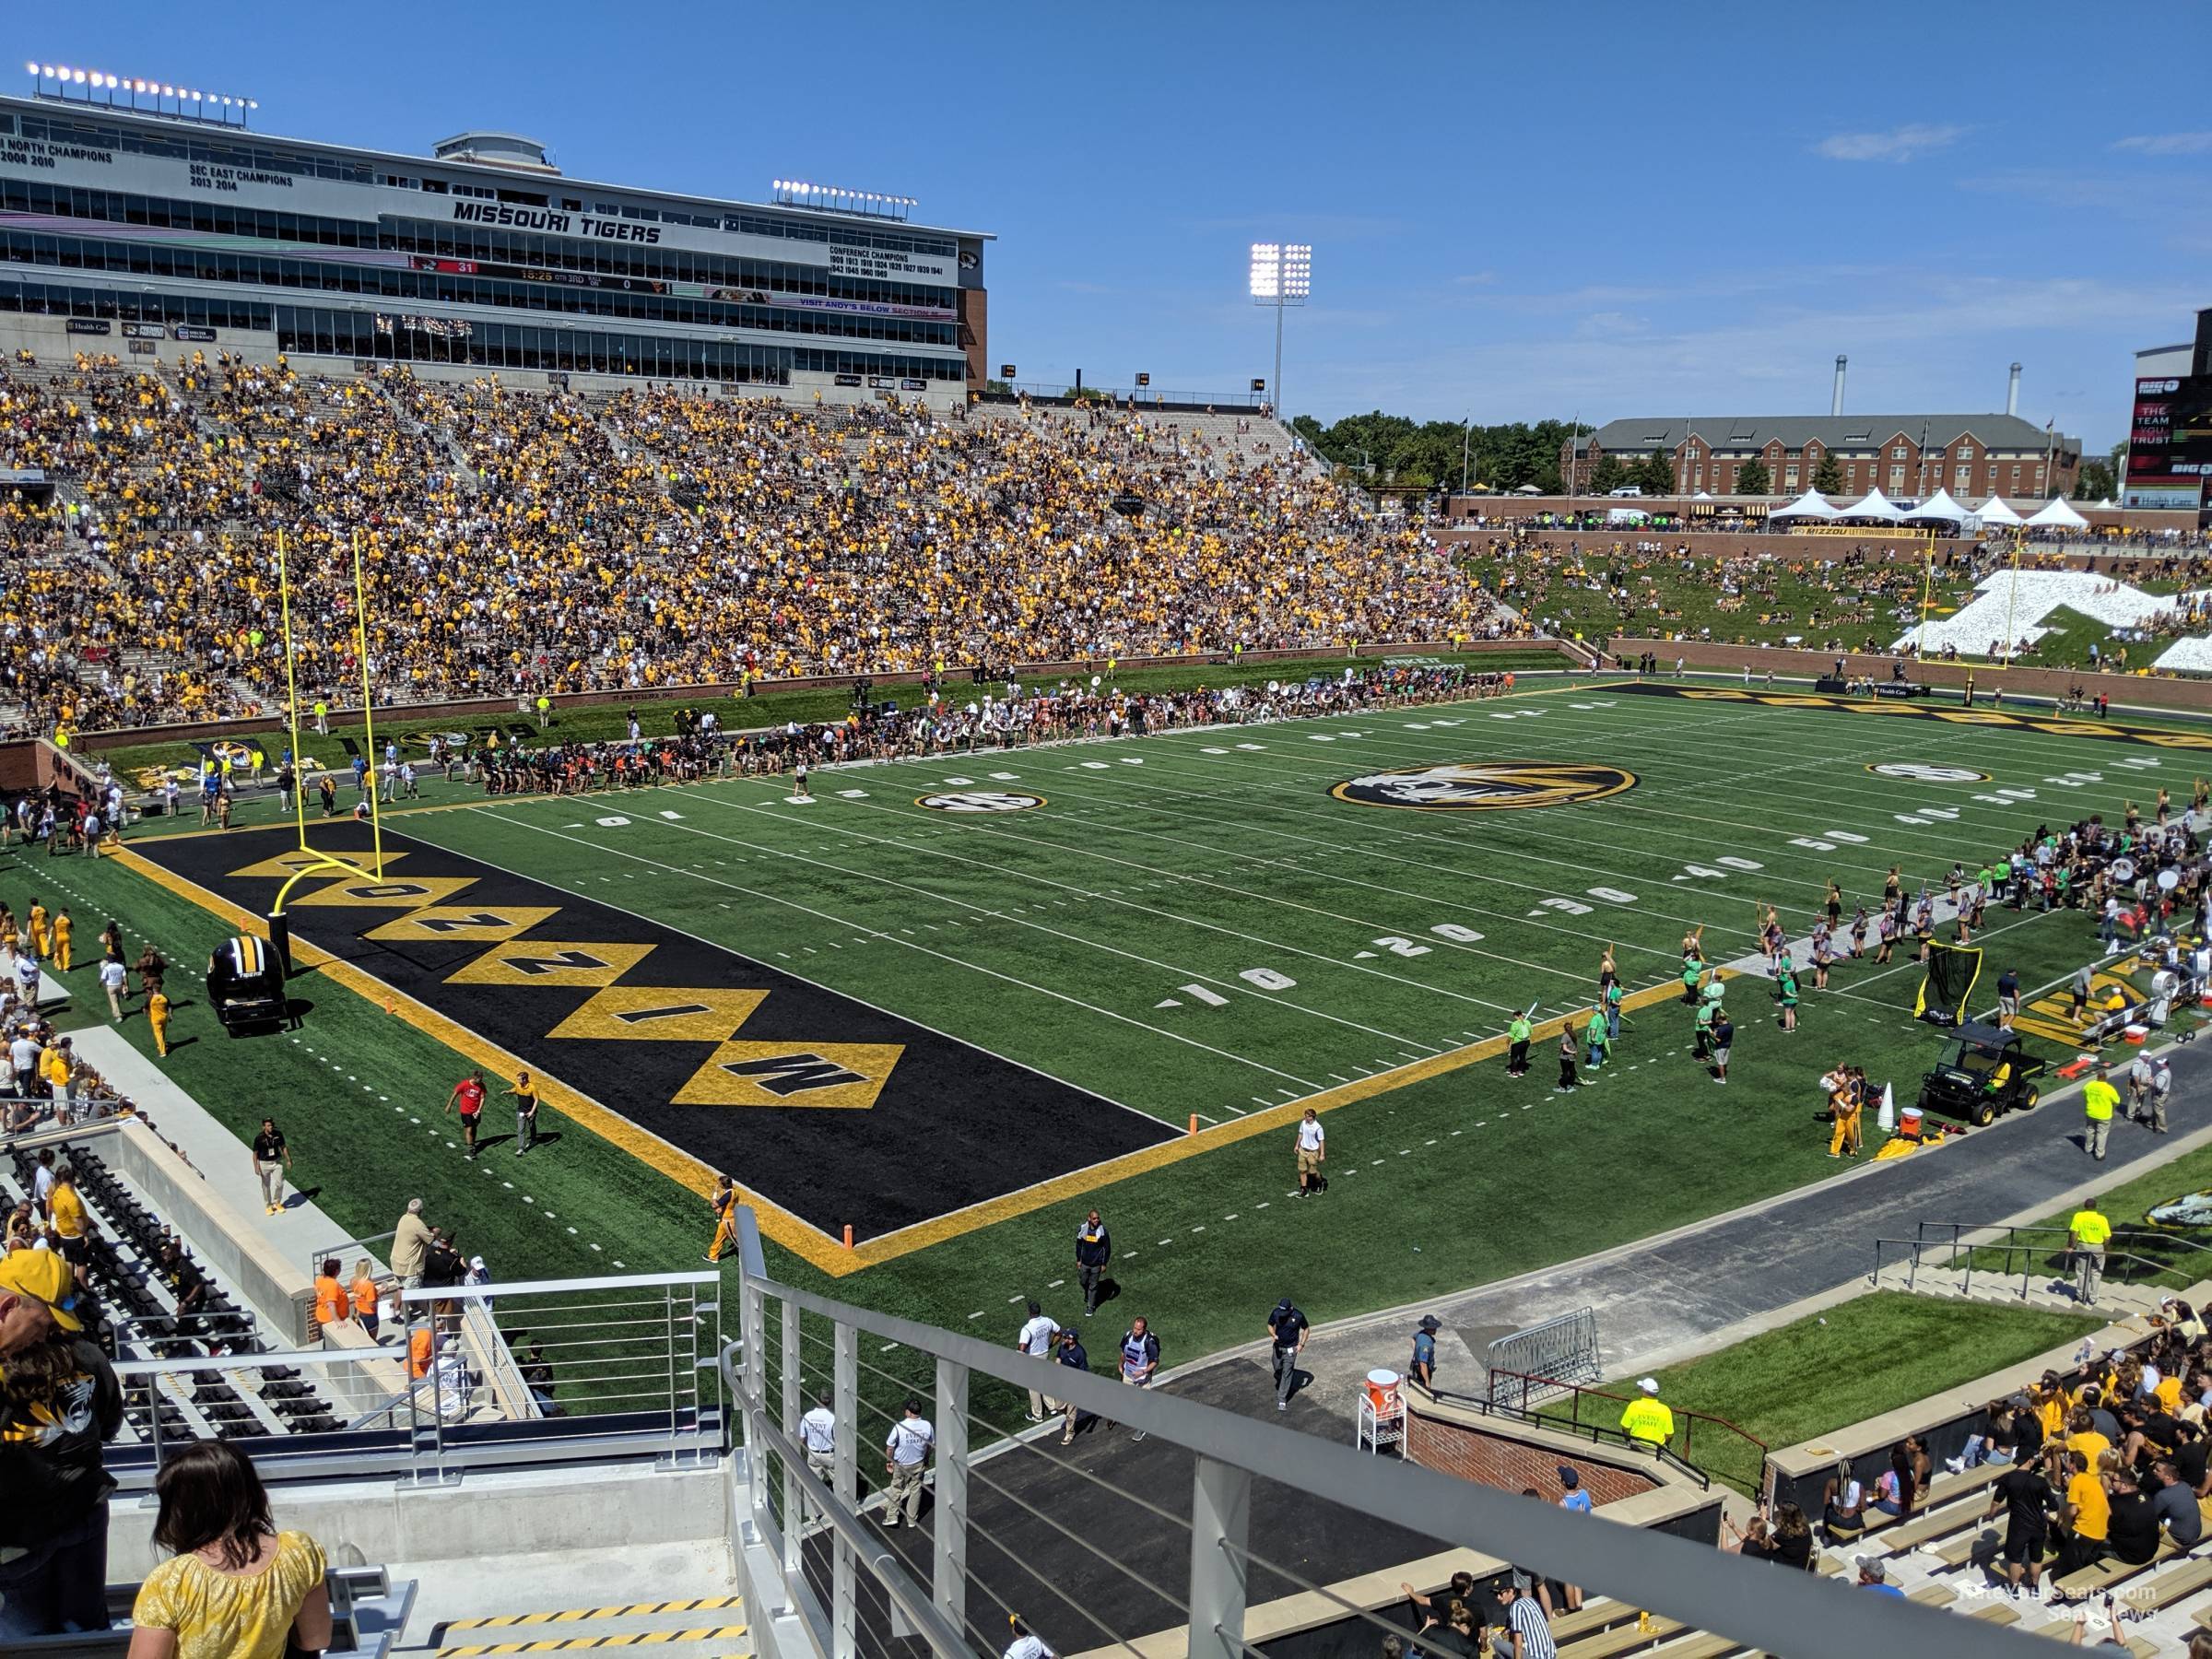 Section 132 at Faurot Field - RateYourSeats.com